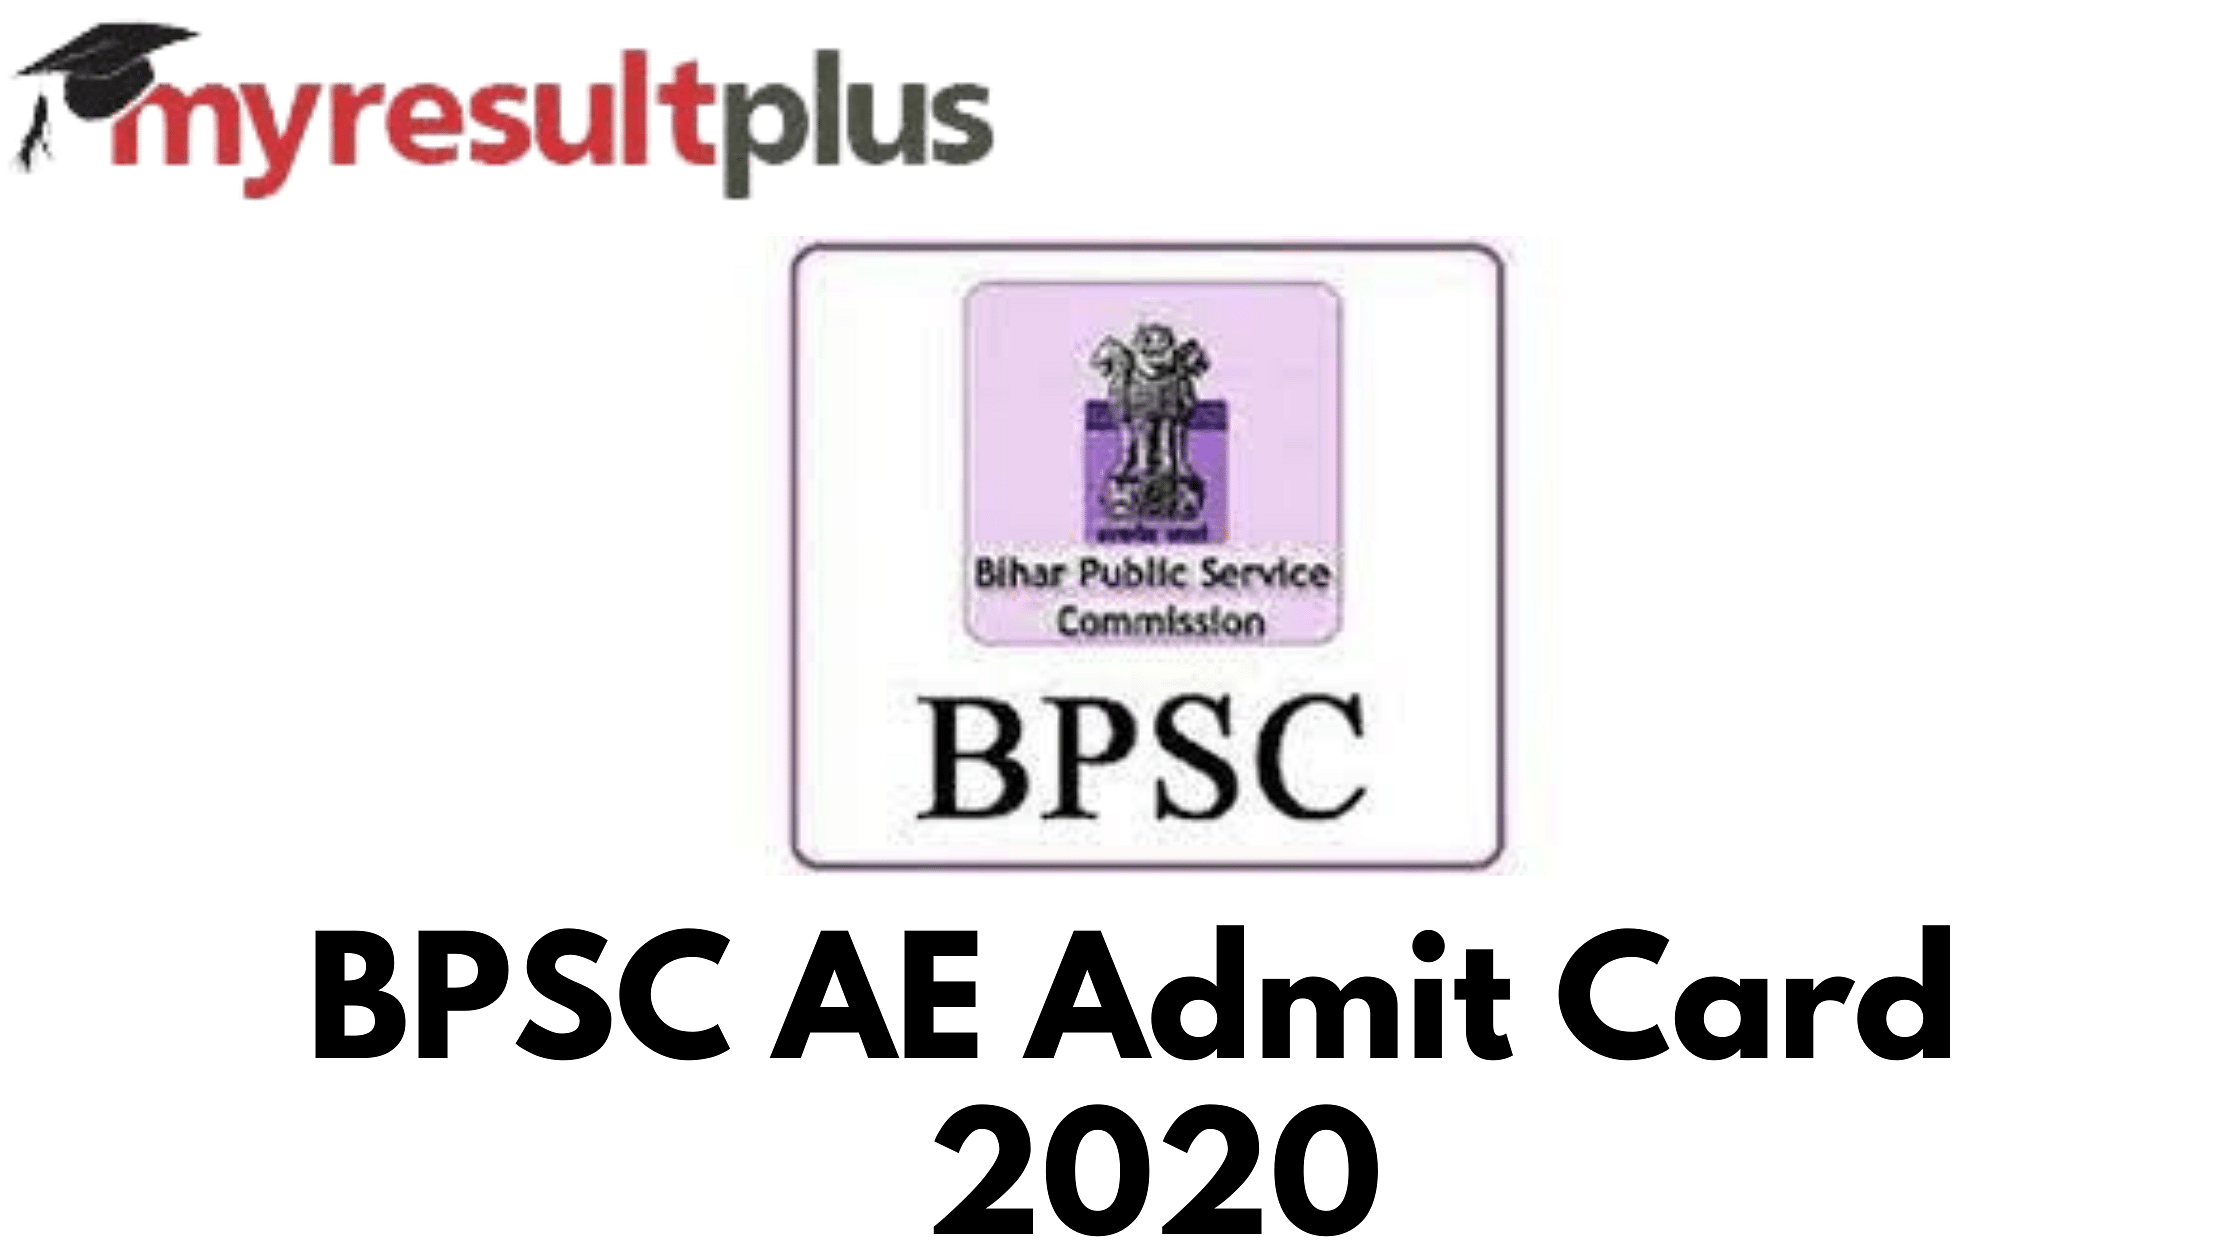 BPSC AE Admit Card 2020 Out, Know How to Download Here